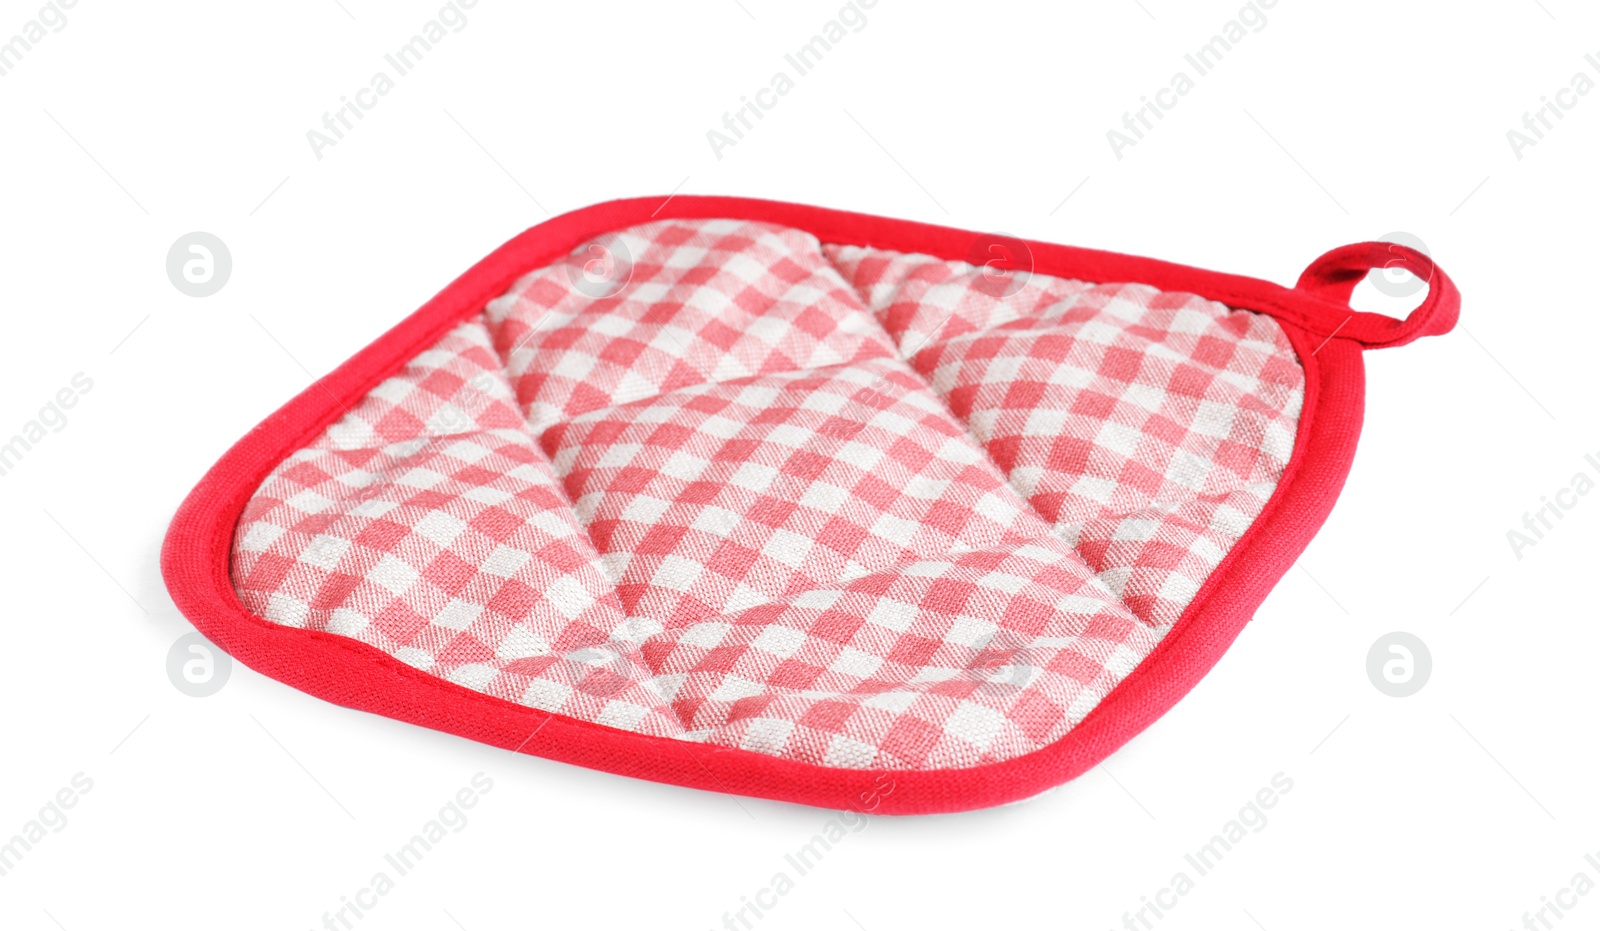 Photo of Oven potholder for hot dishes on white background